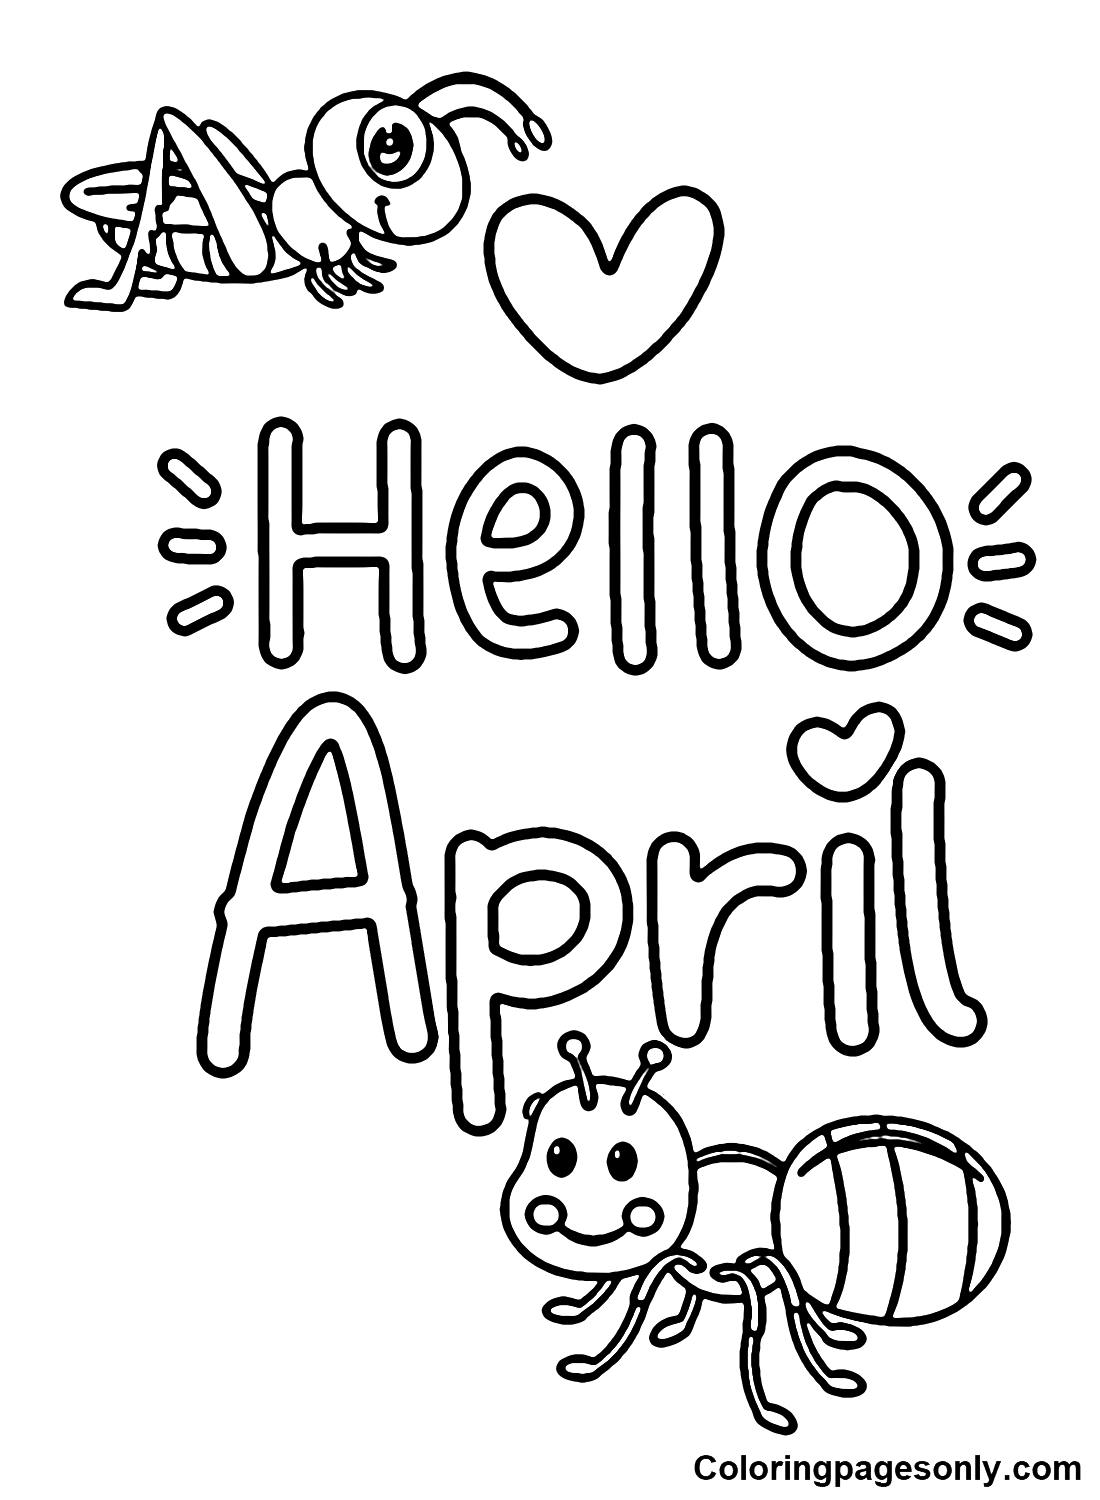 Animals Hello April Coloring Pages